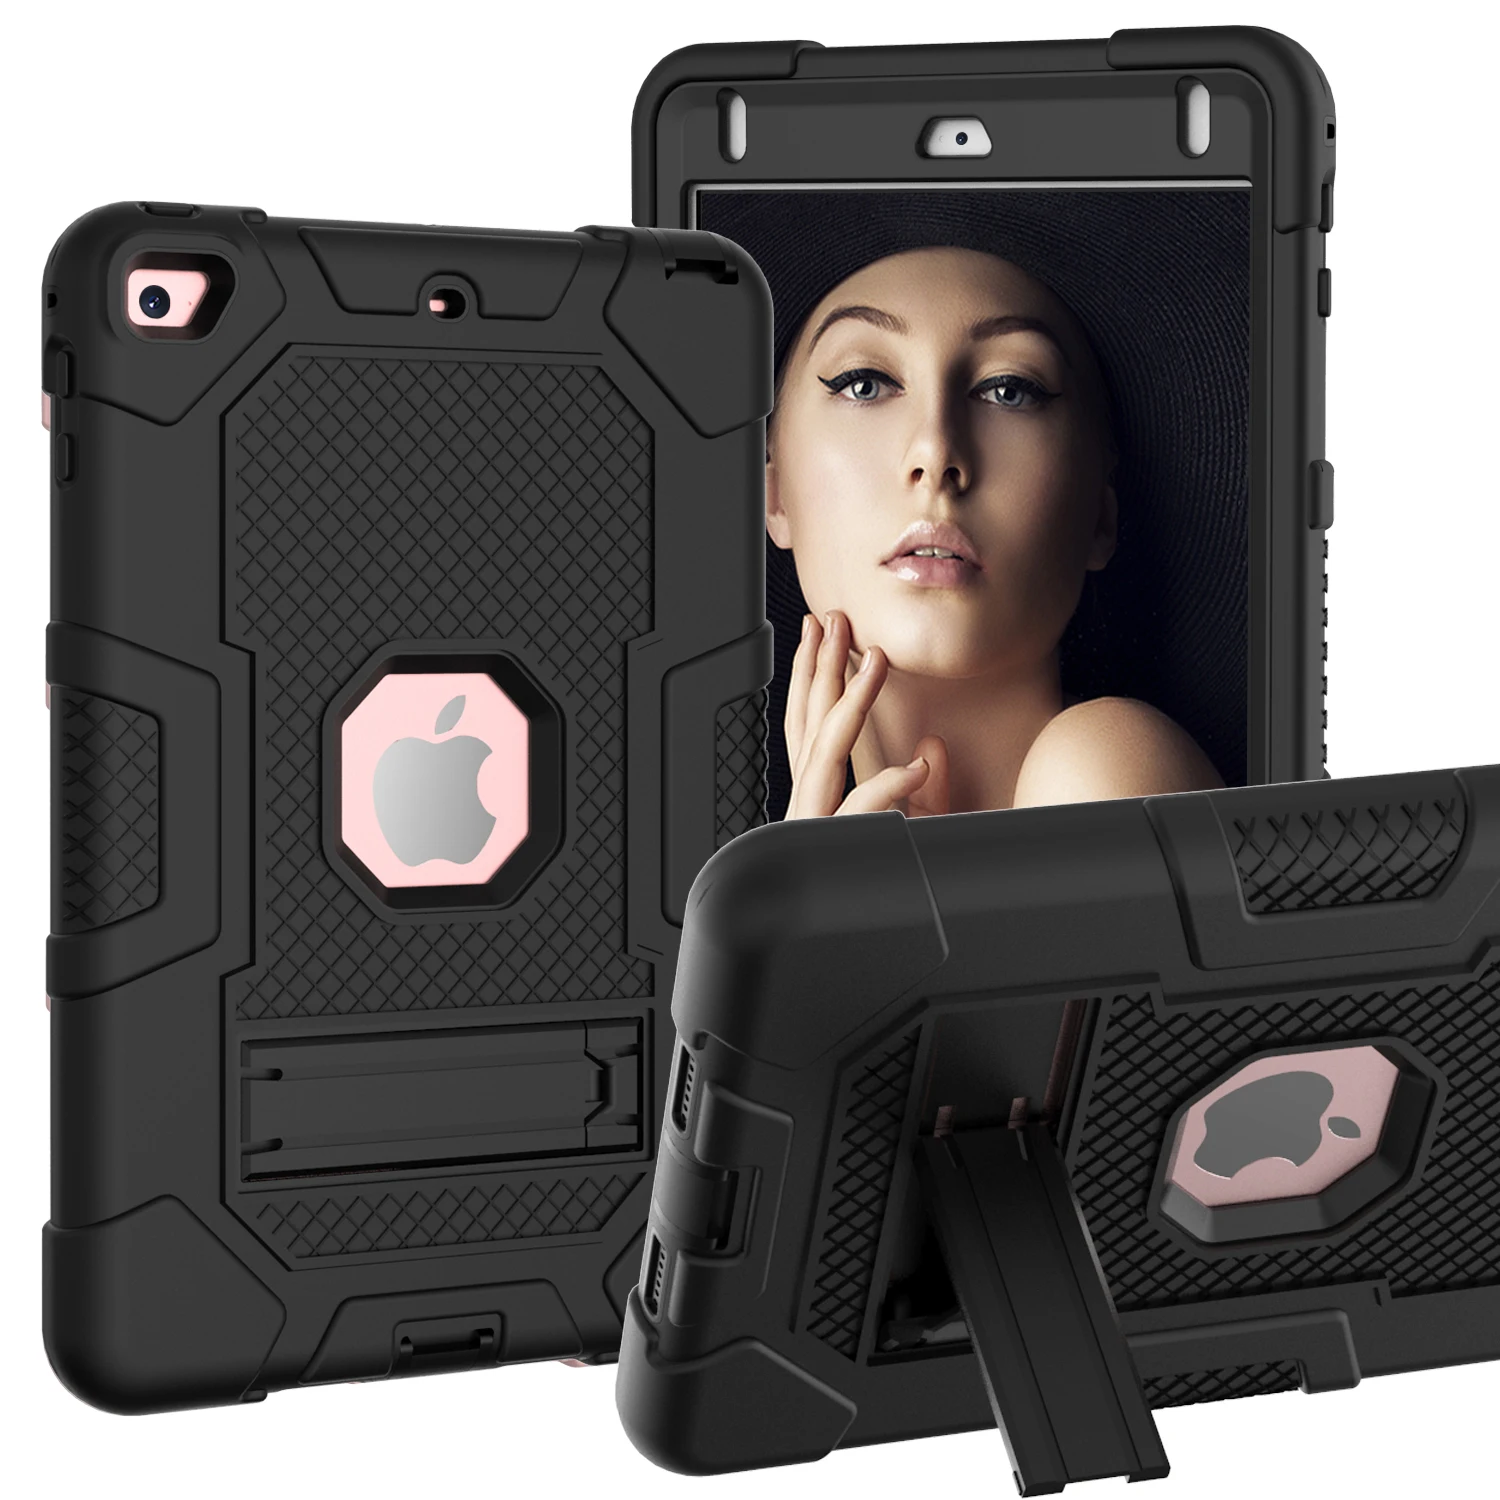 

Heavy Duty Case For iPad Mini 7.9 inch 4/ 5 4th Gen / 5th Gen Rugged Tough Armor Defender Shockproof Kickstand Tablet Cover